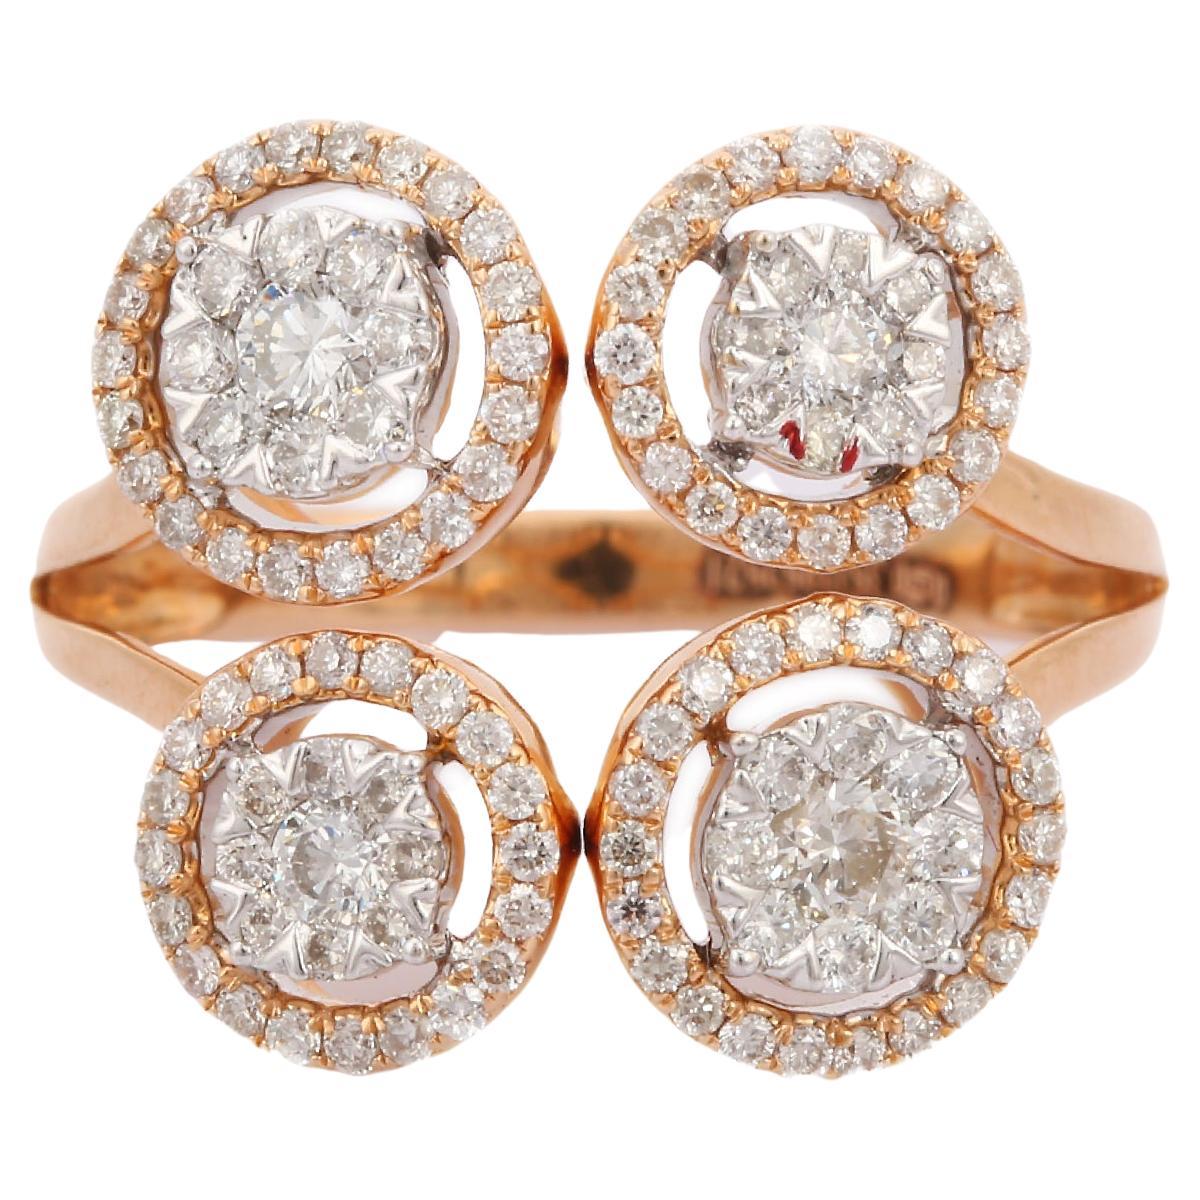 Statement Illusion Diamond Wedding Cluster Ring in 18K Solid Rose Gold